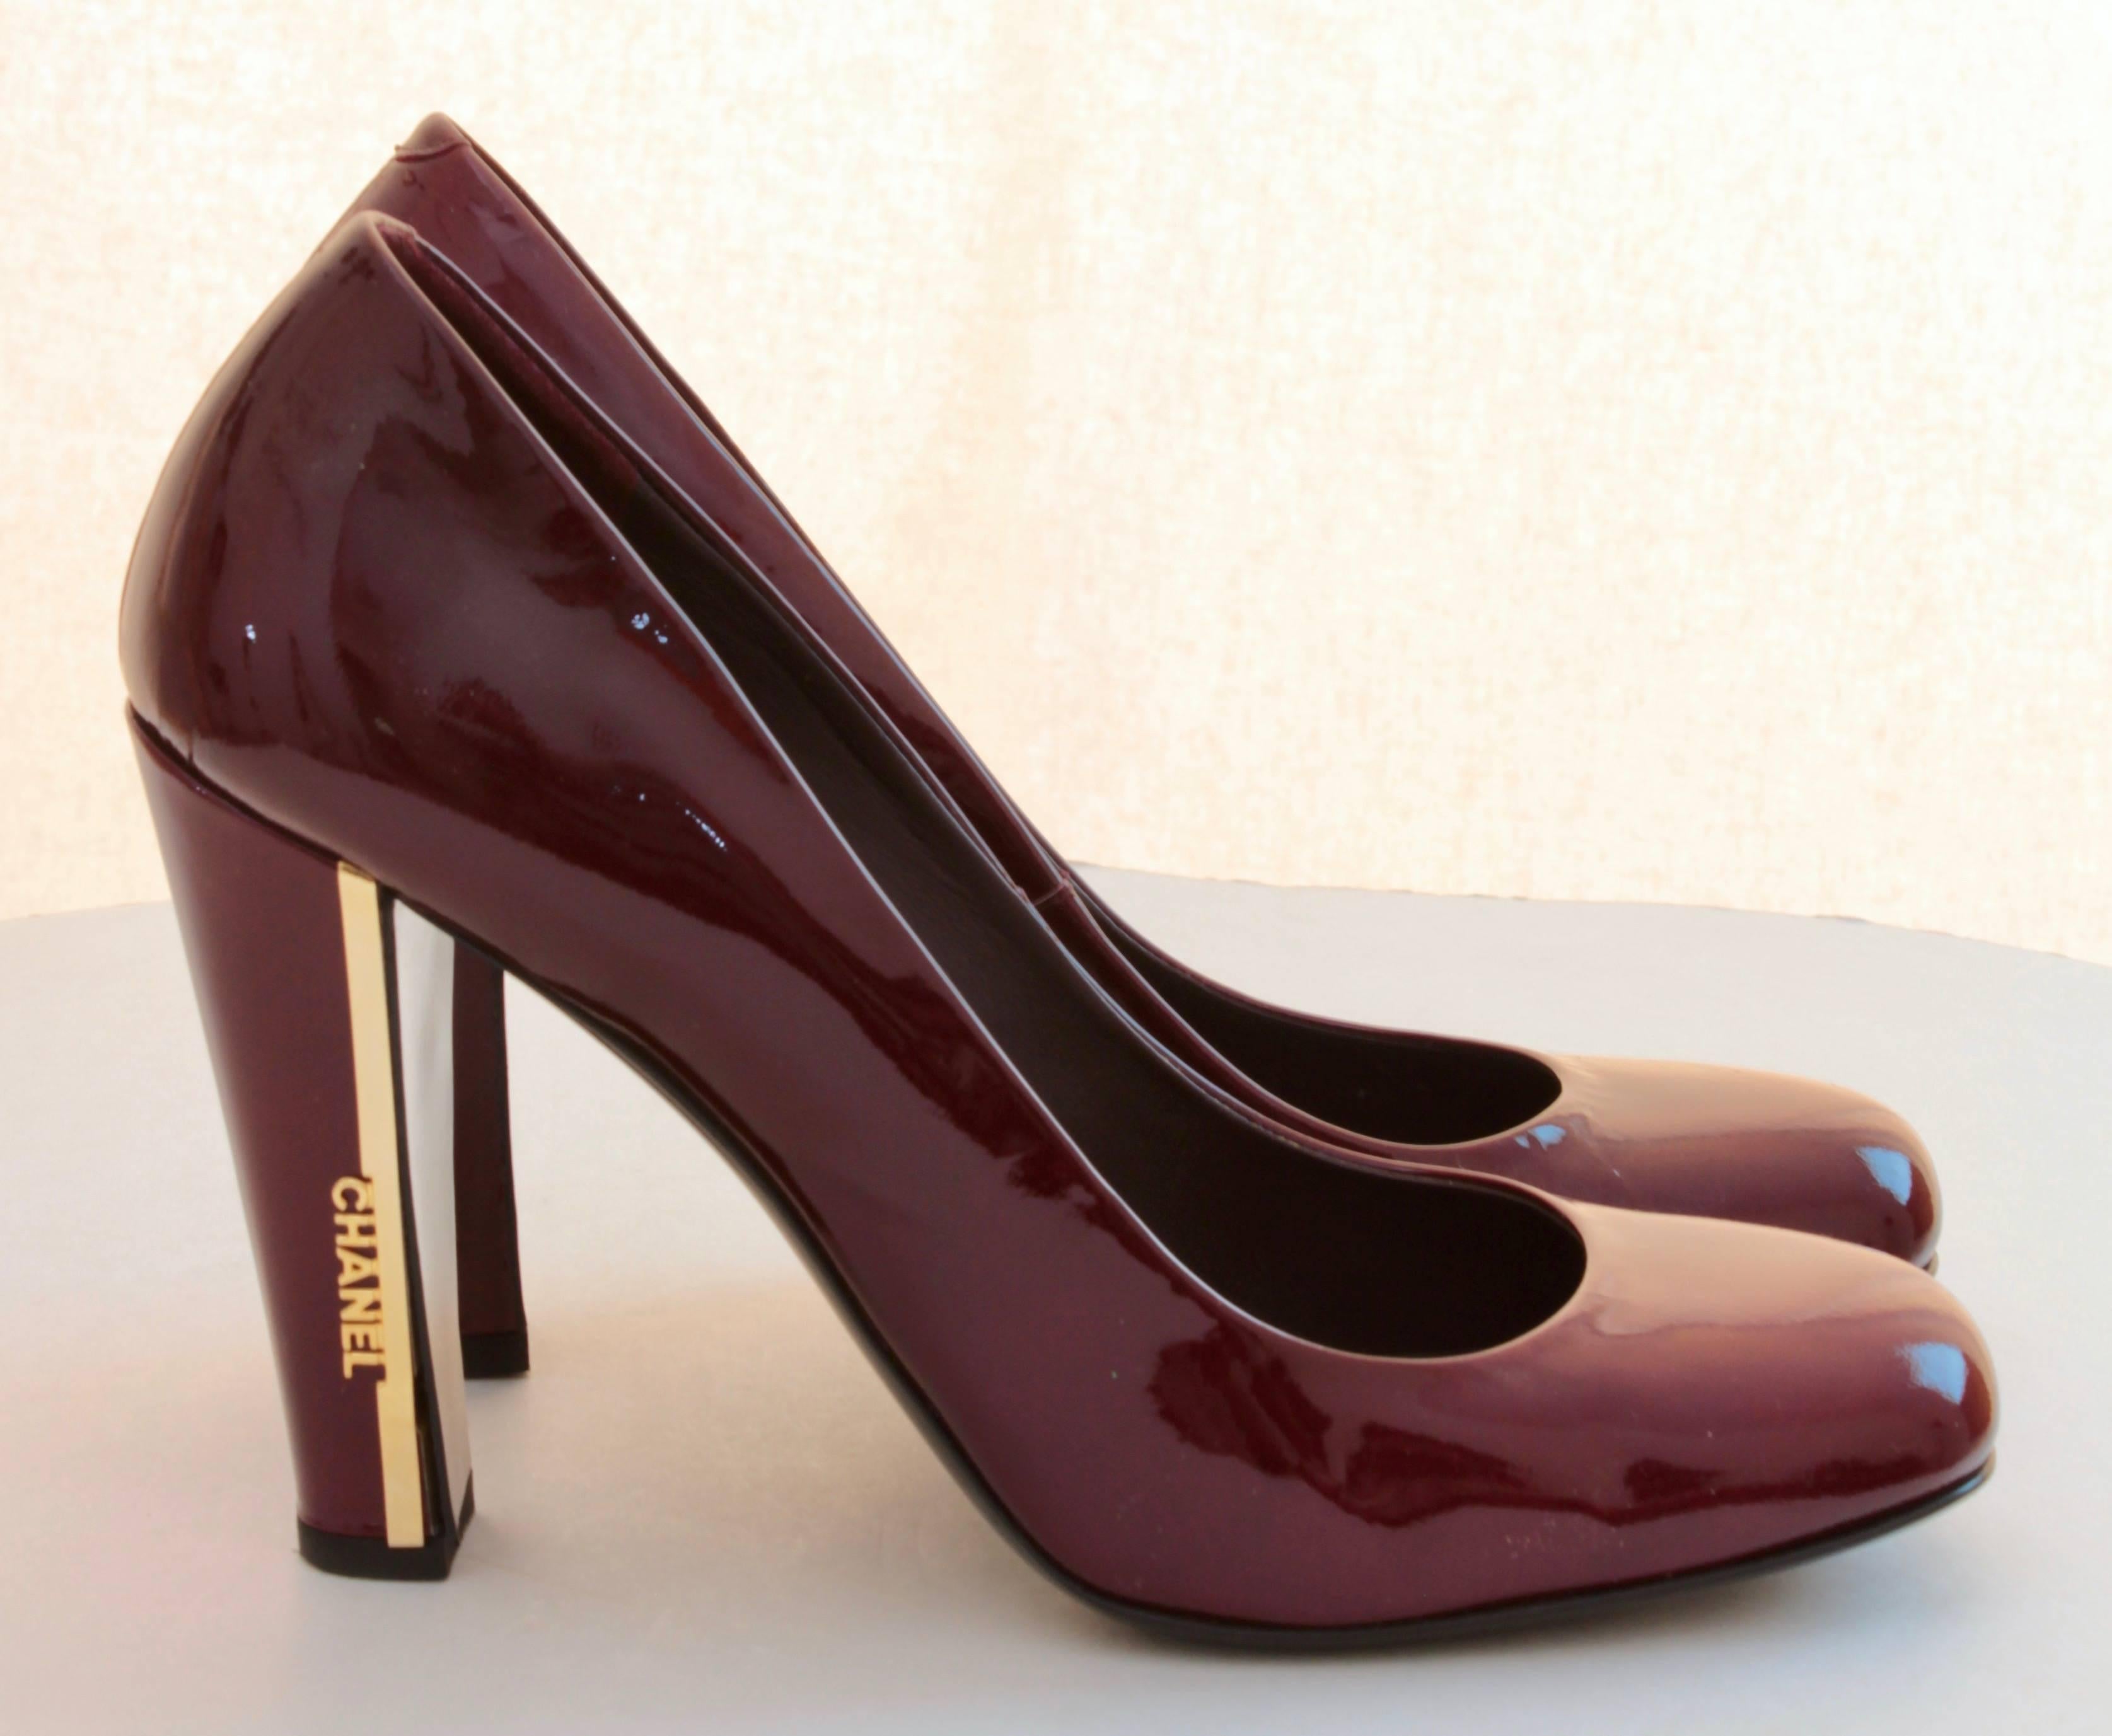 Here's a pair of patent leather heels from Chanel, made back in 2008.  Made from a maroon patent, they feature the Chanel logo on the outside of each block heel.  In very good condition for their age, with only minimal signs of prior wear.  Size 39,